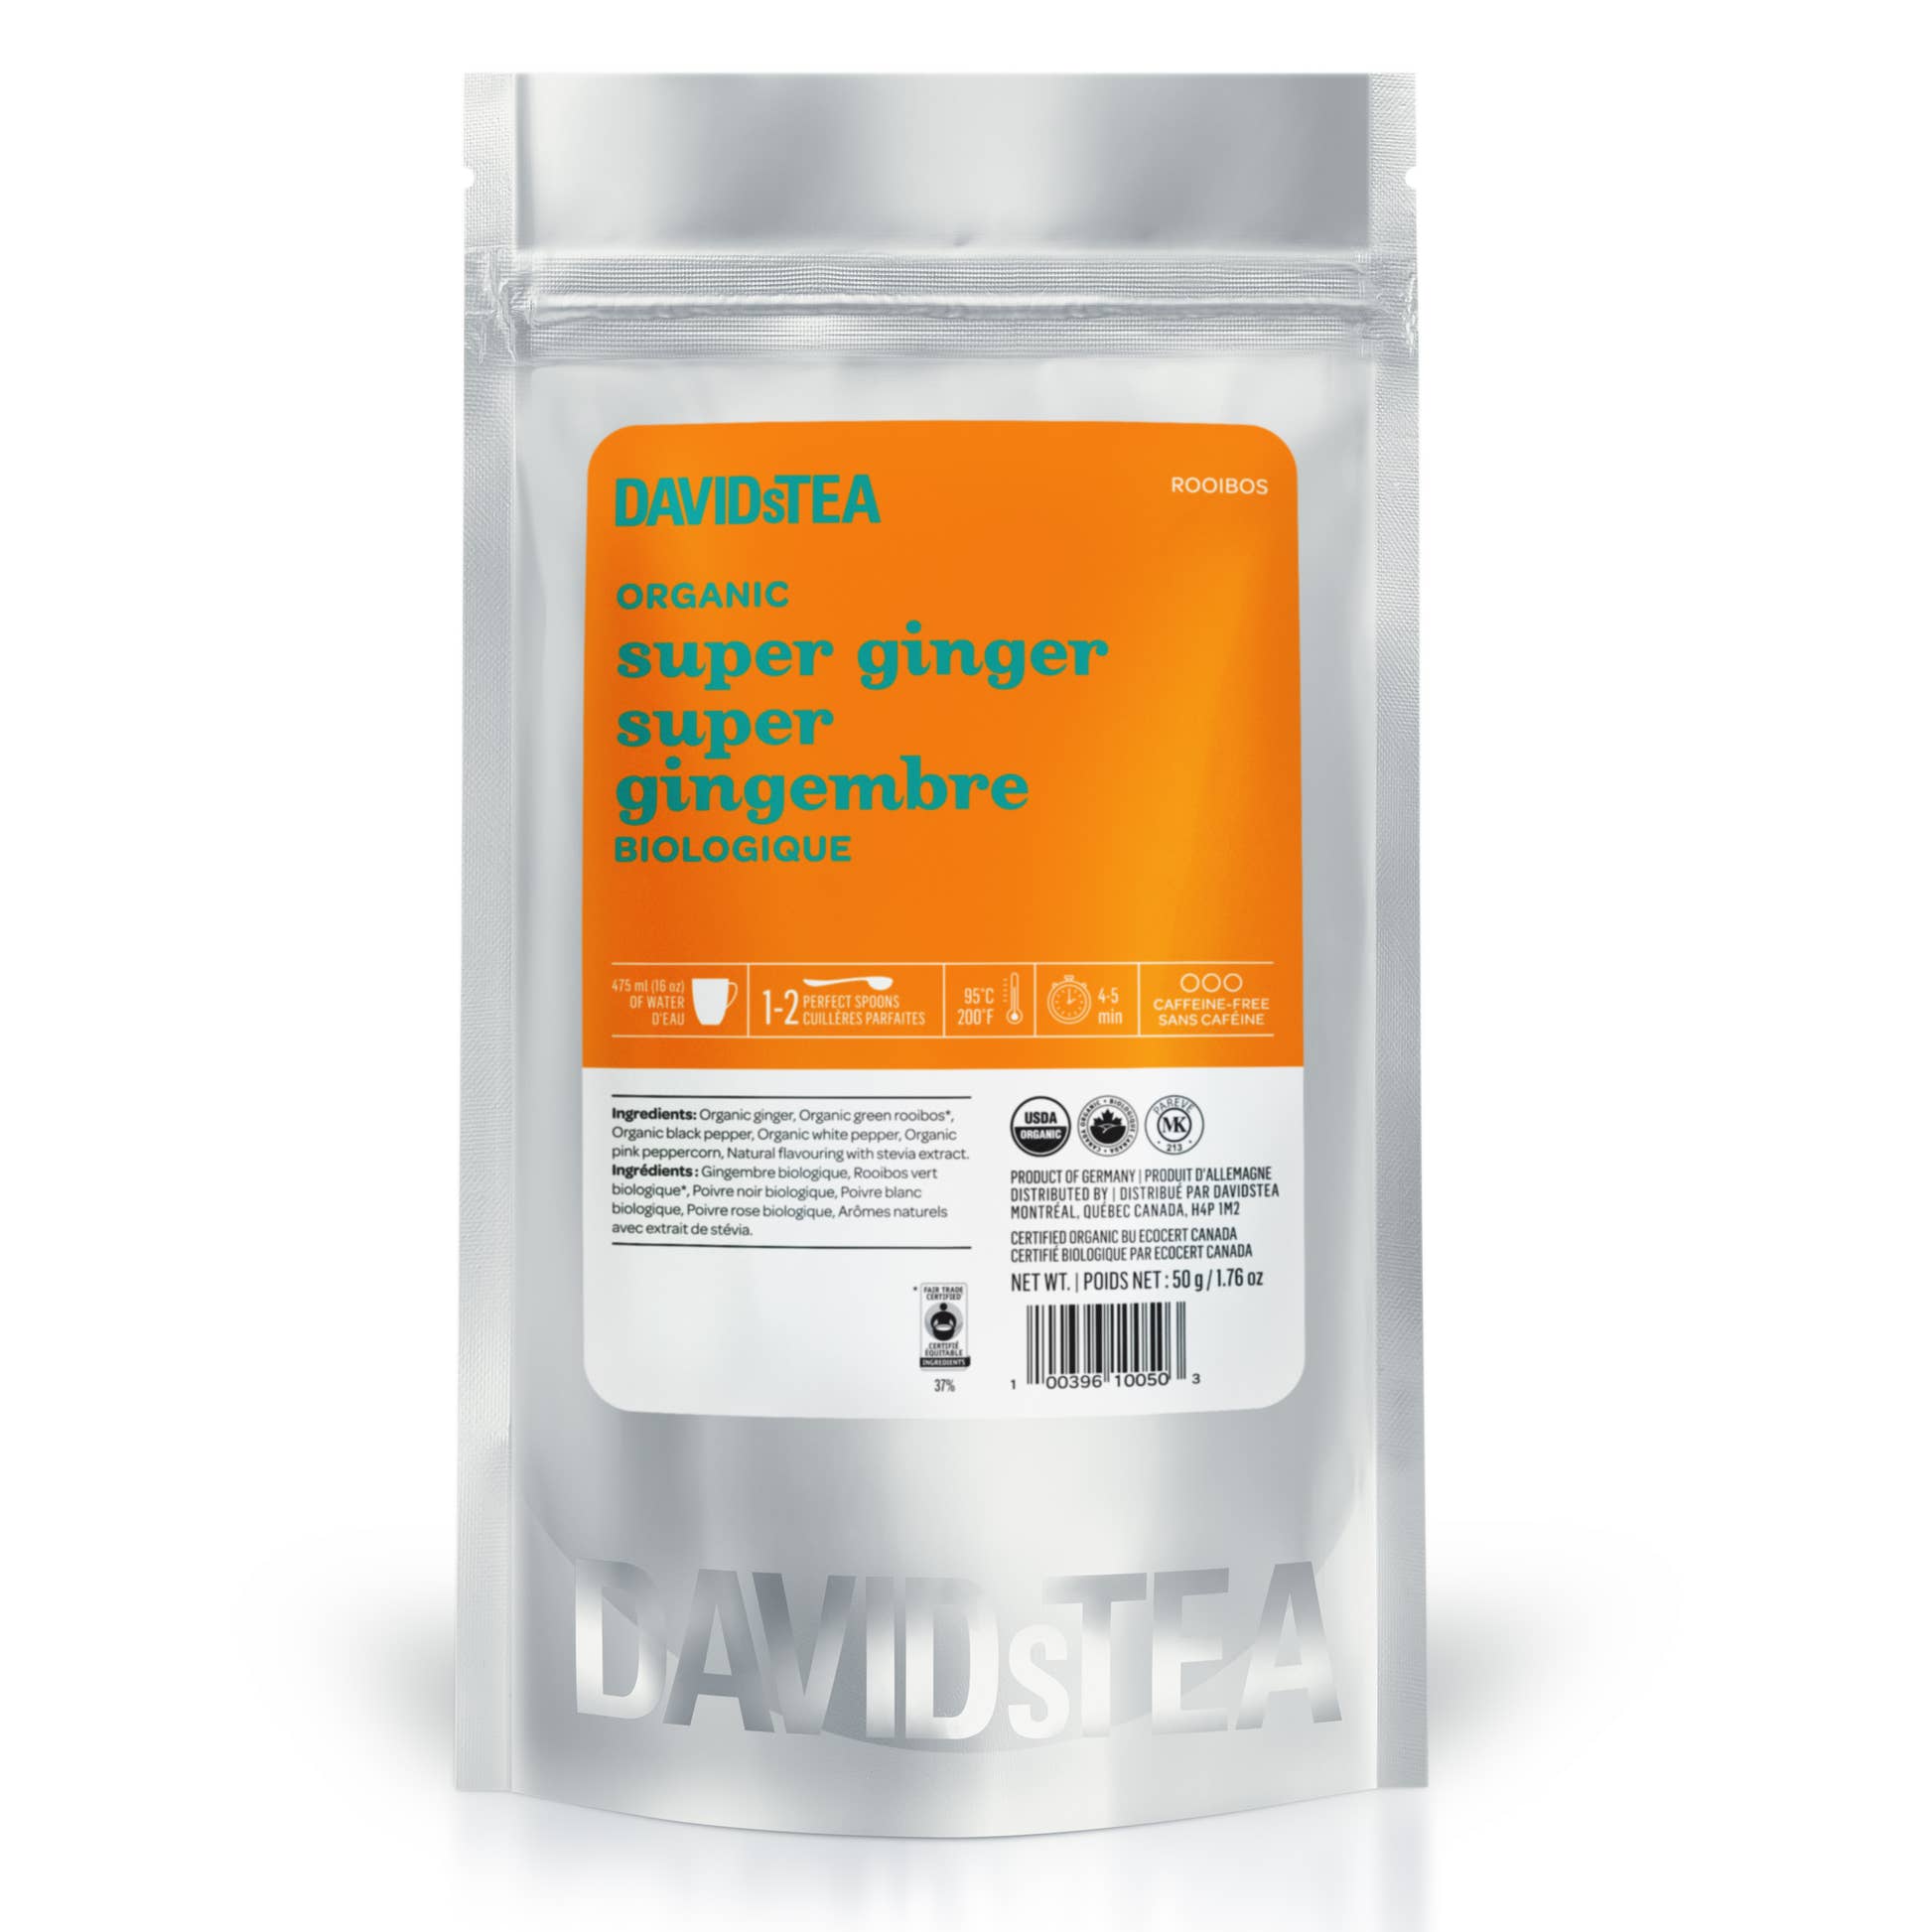 organic super ginger sips by davidstea herbal tea blend loose leaf in silver pouch